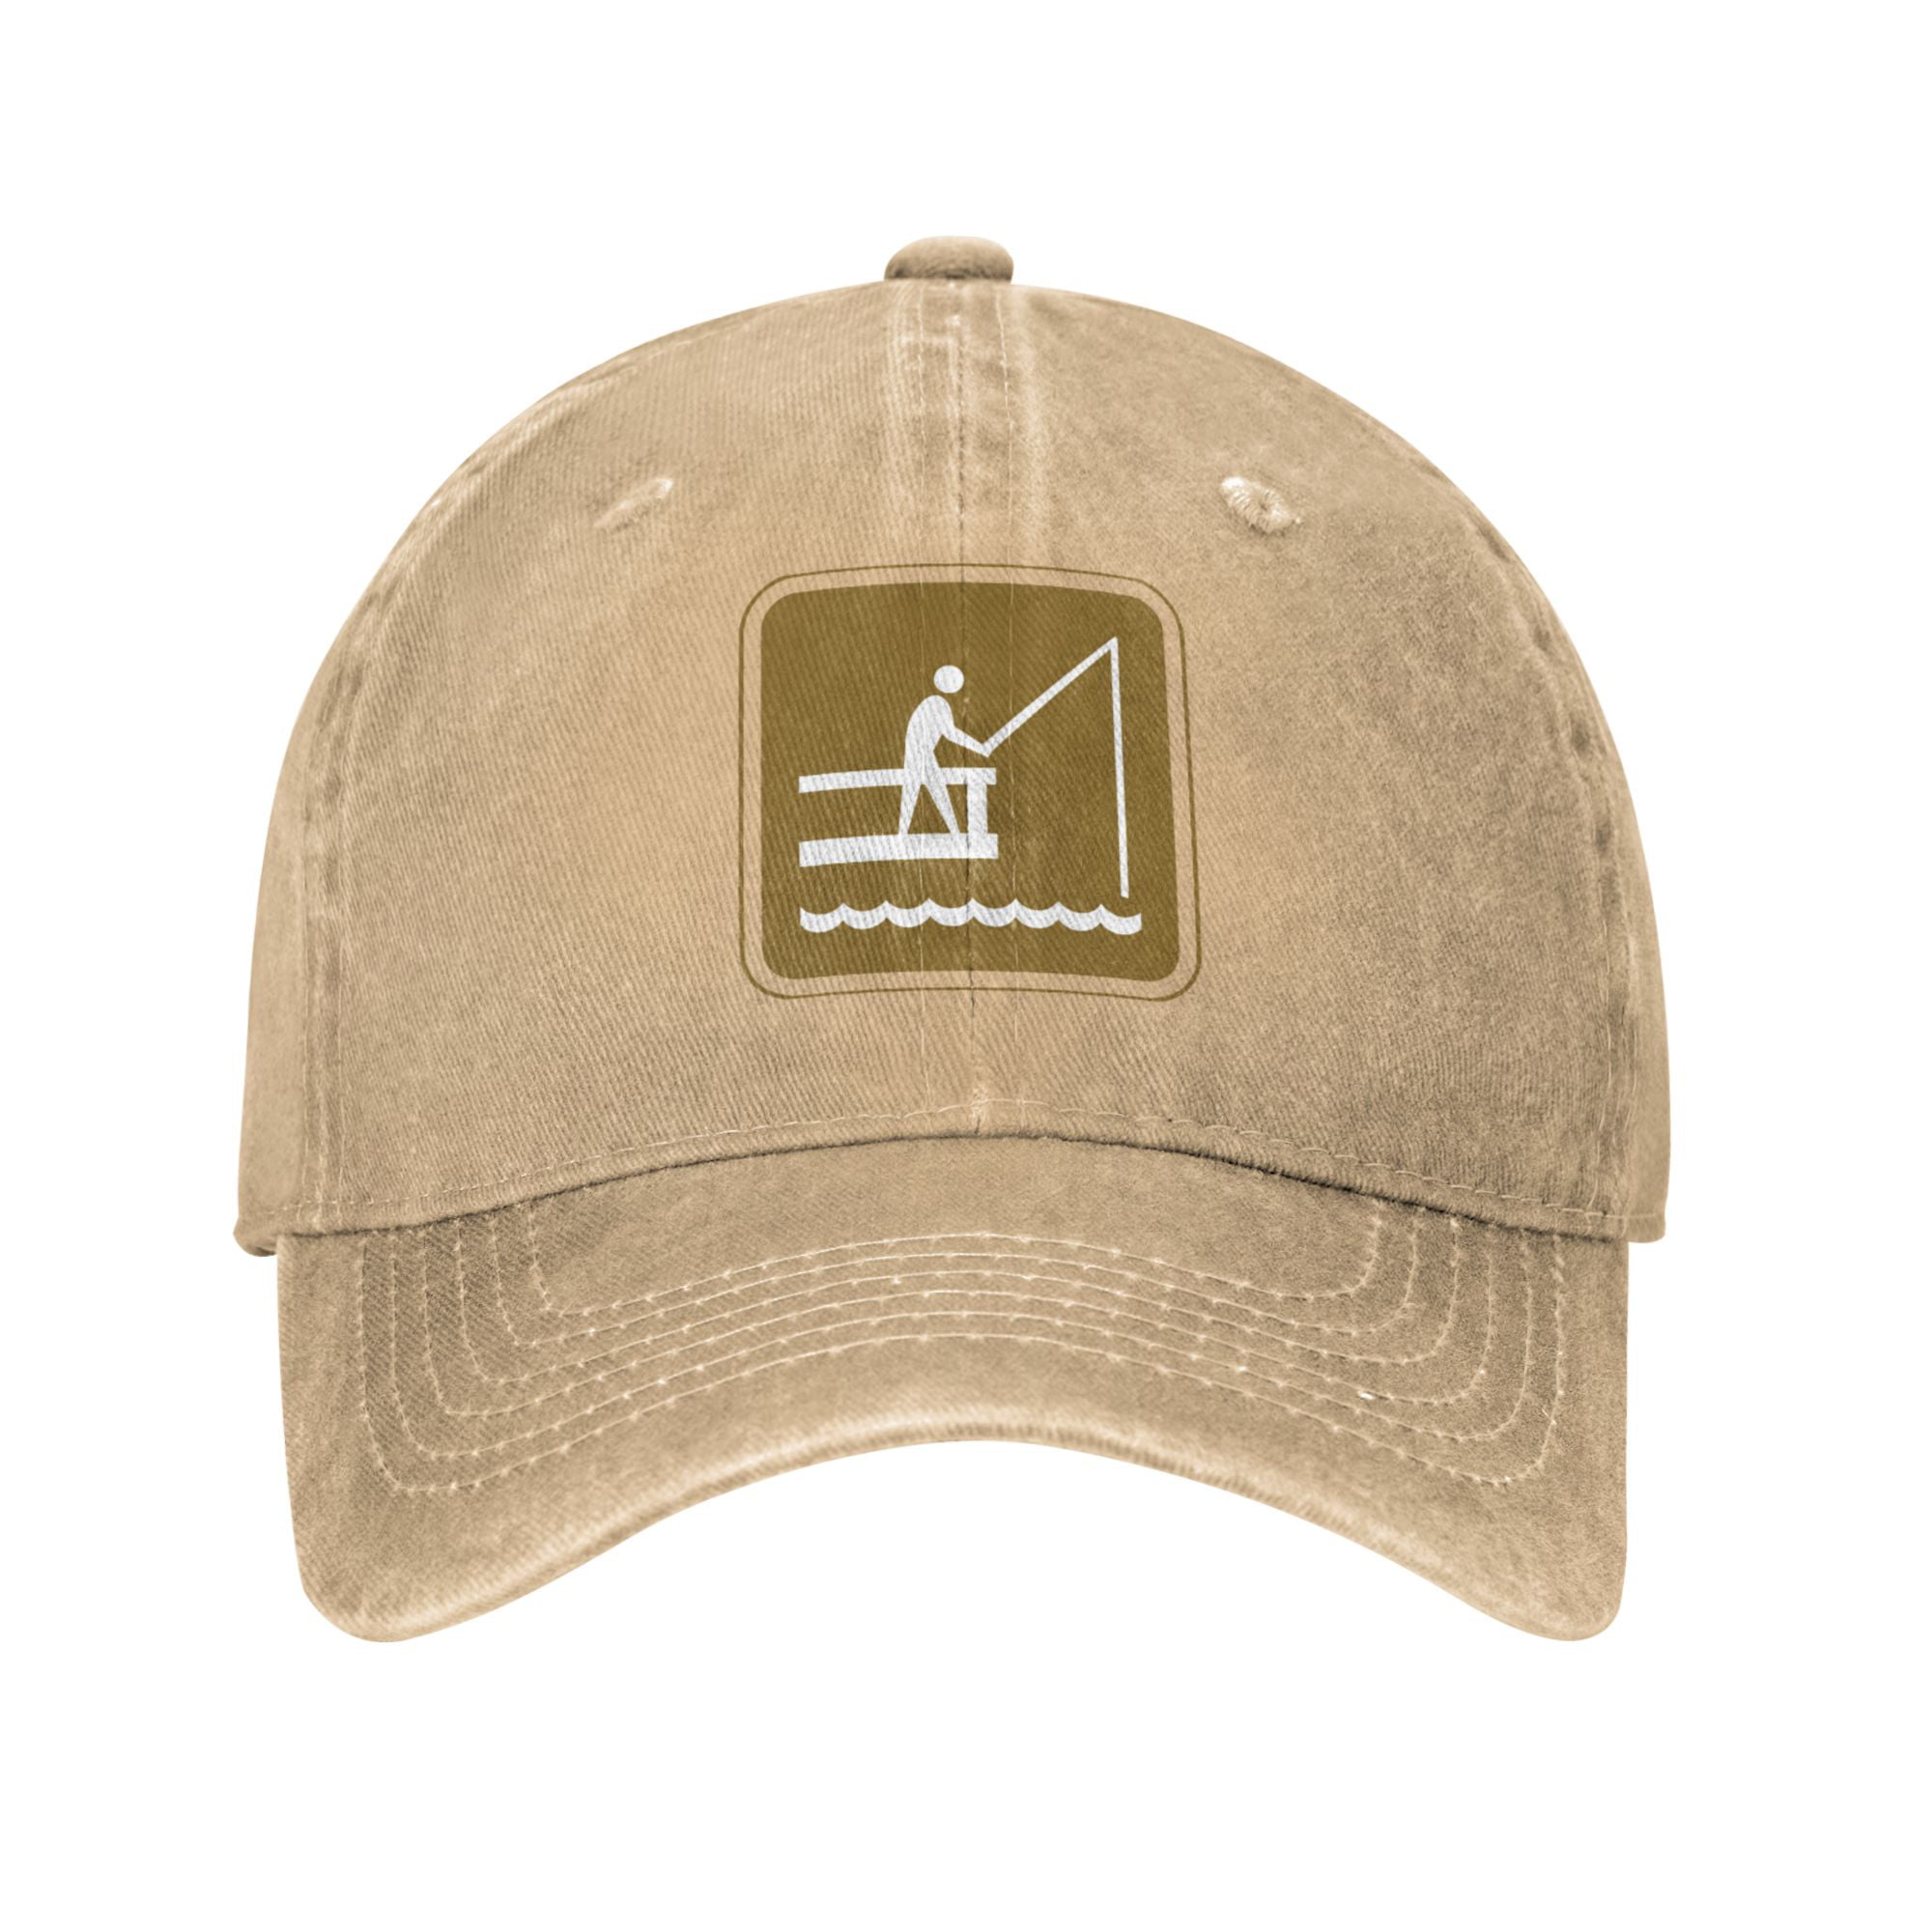 DouZhe Adjustable Washed Cotton Baseball Cap - Brown Fishing Sign Prints  Vintage Dad Hat Unisex Sports Caps (Yellow)